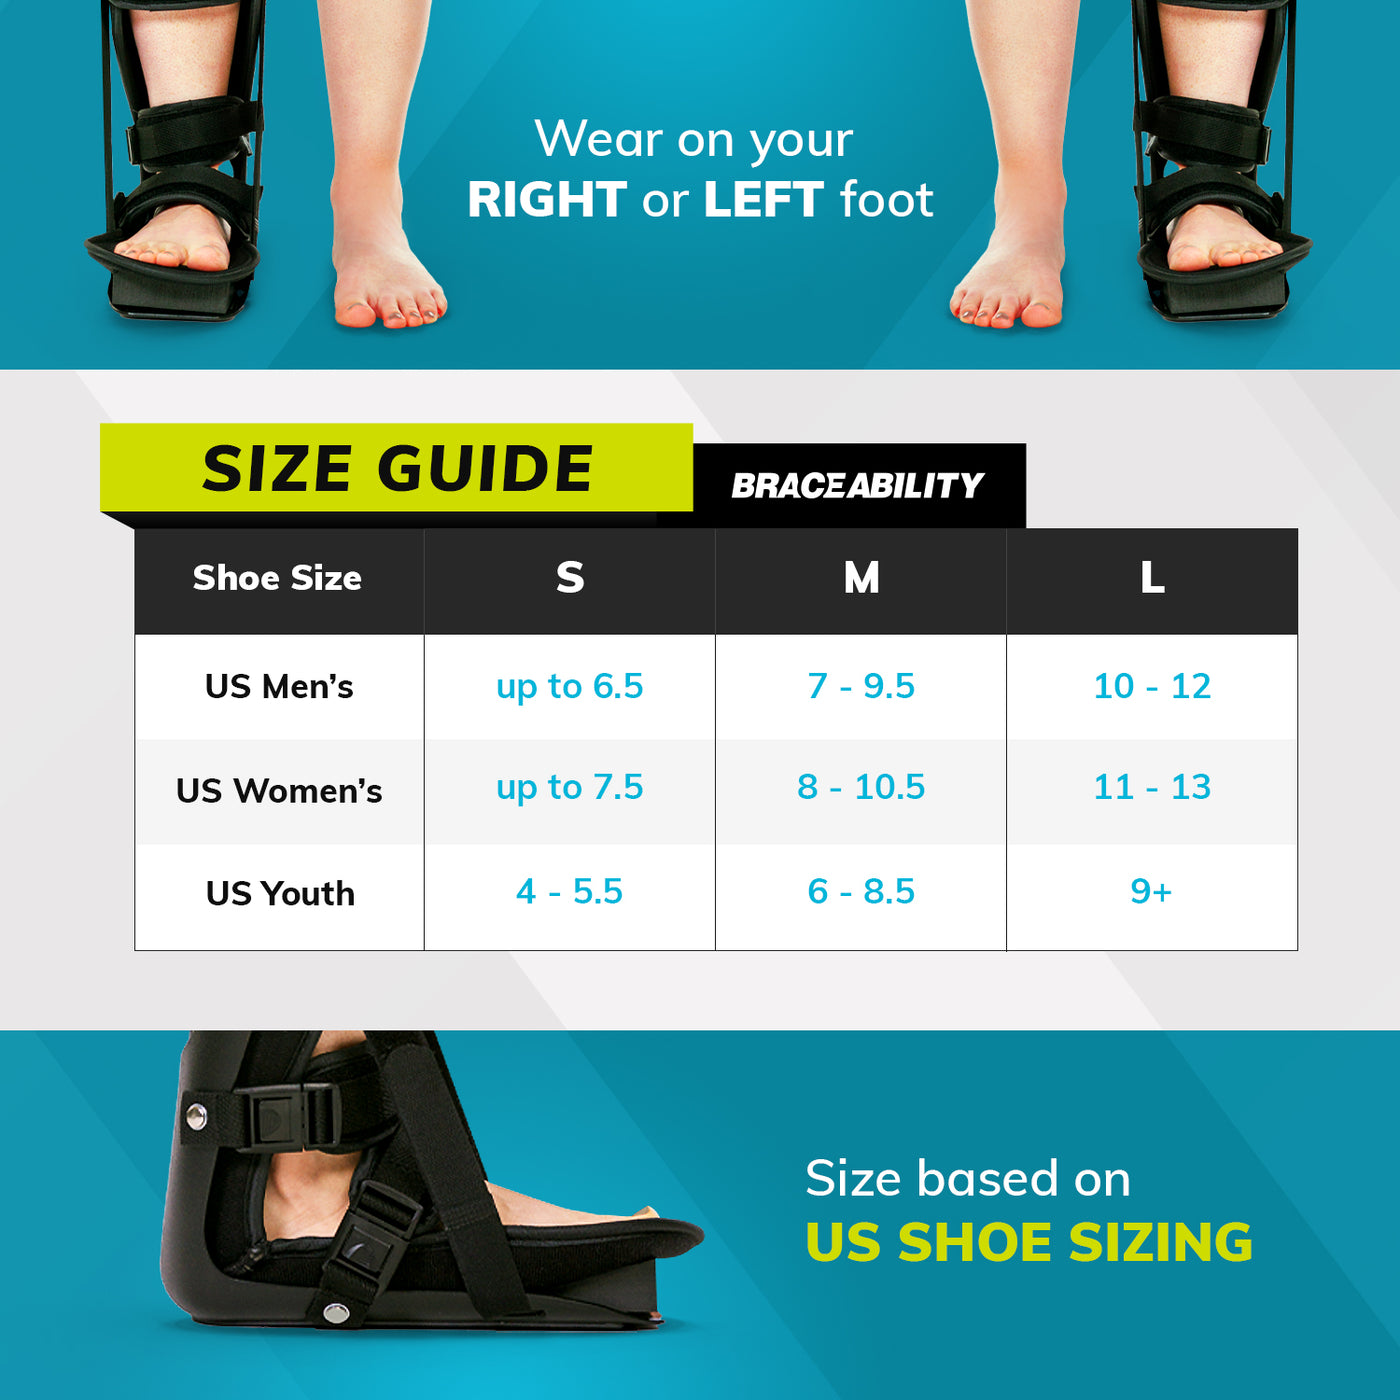 Sizing chart for plantar fasciitis nighttime stretching boot. Available in sizes S-L.